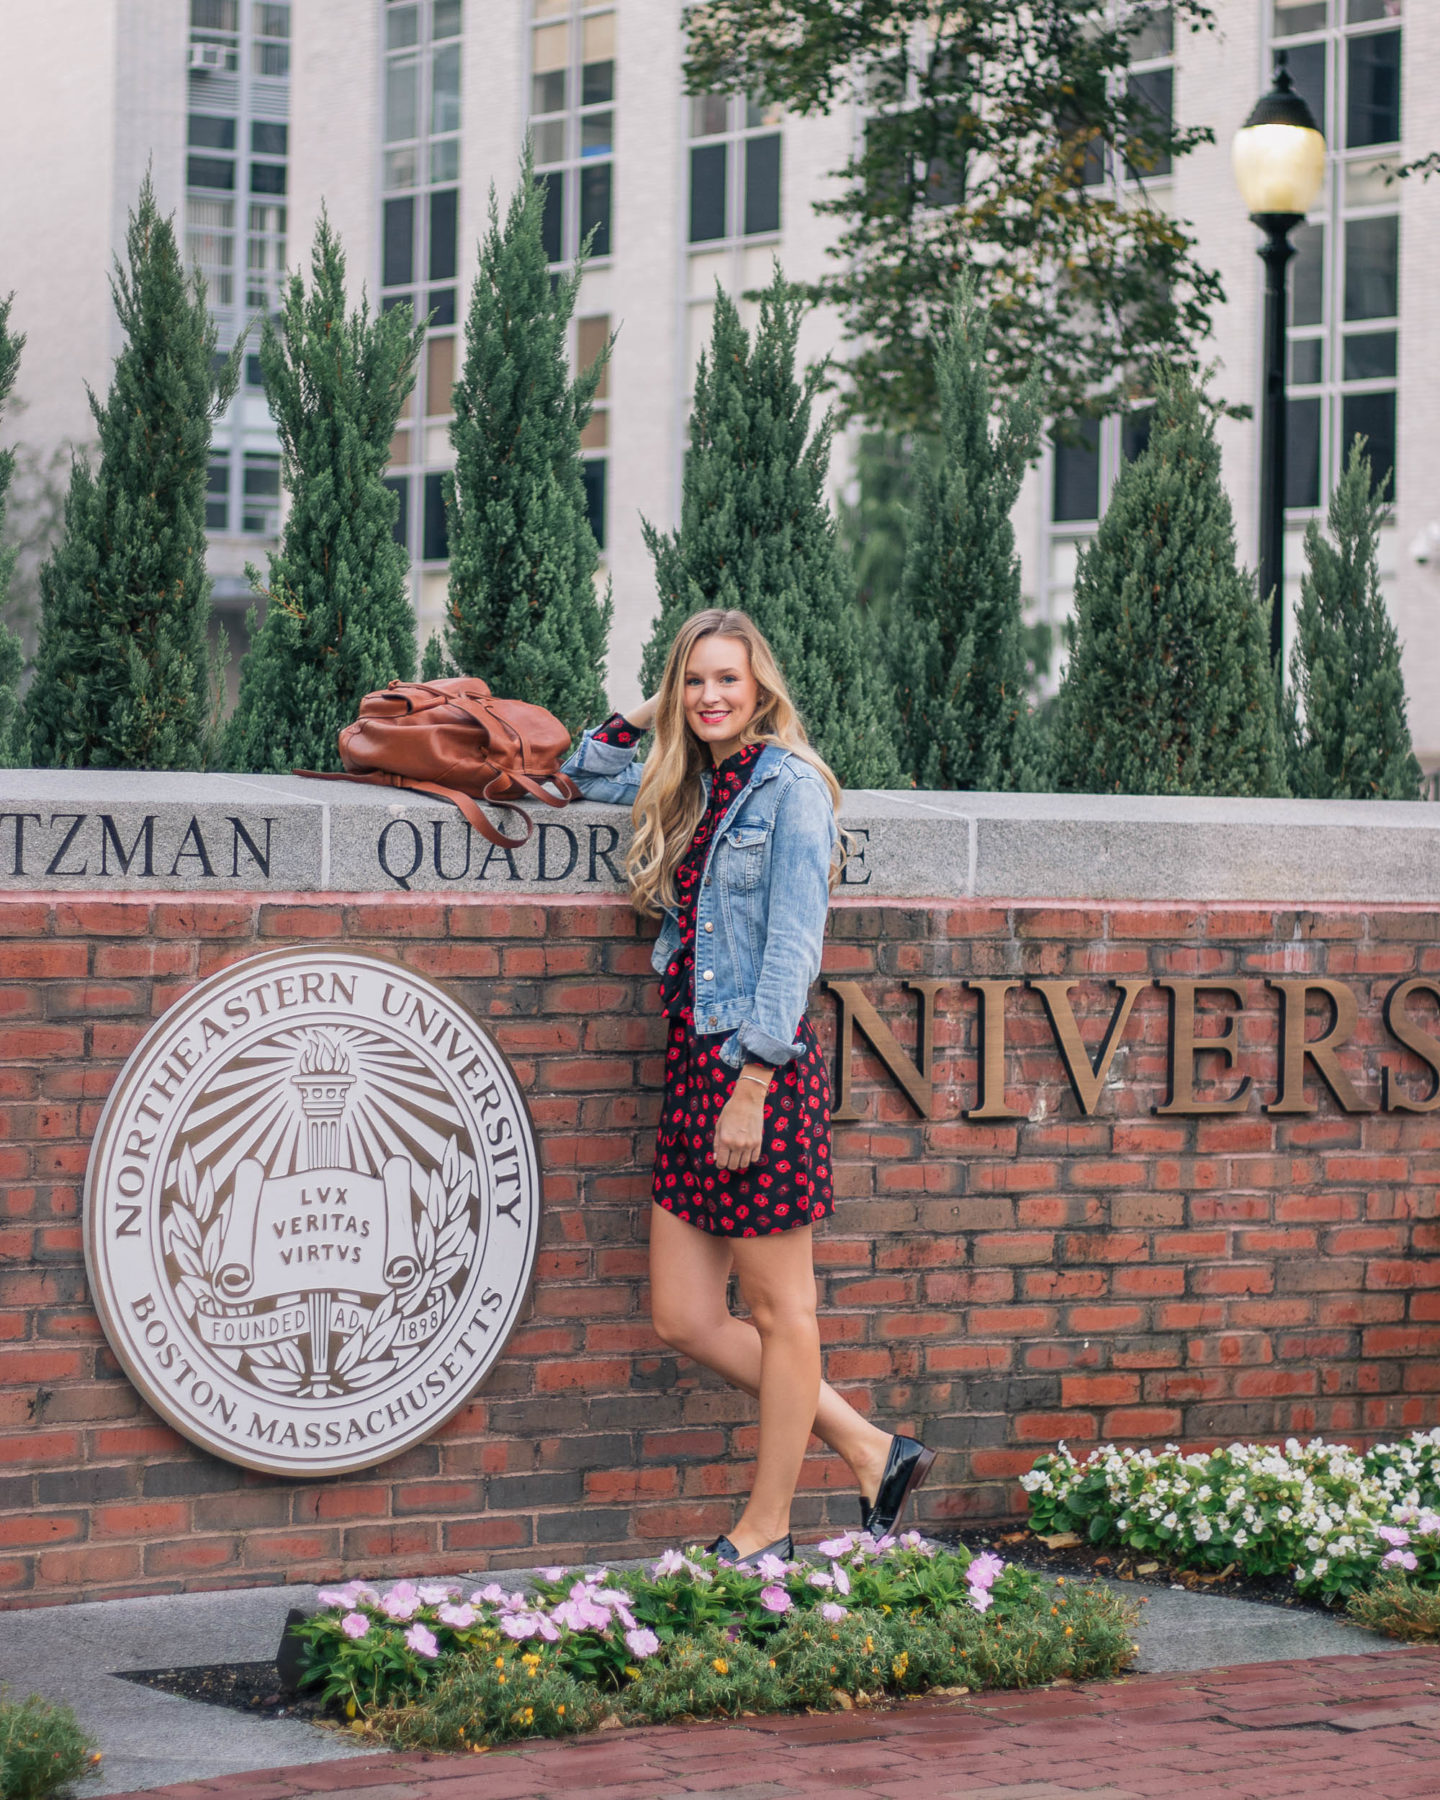 Lifestyle blogger, Leigha Gardner, on going back to school and why pursue an MBA at Northeastern